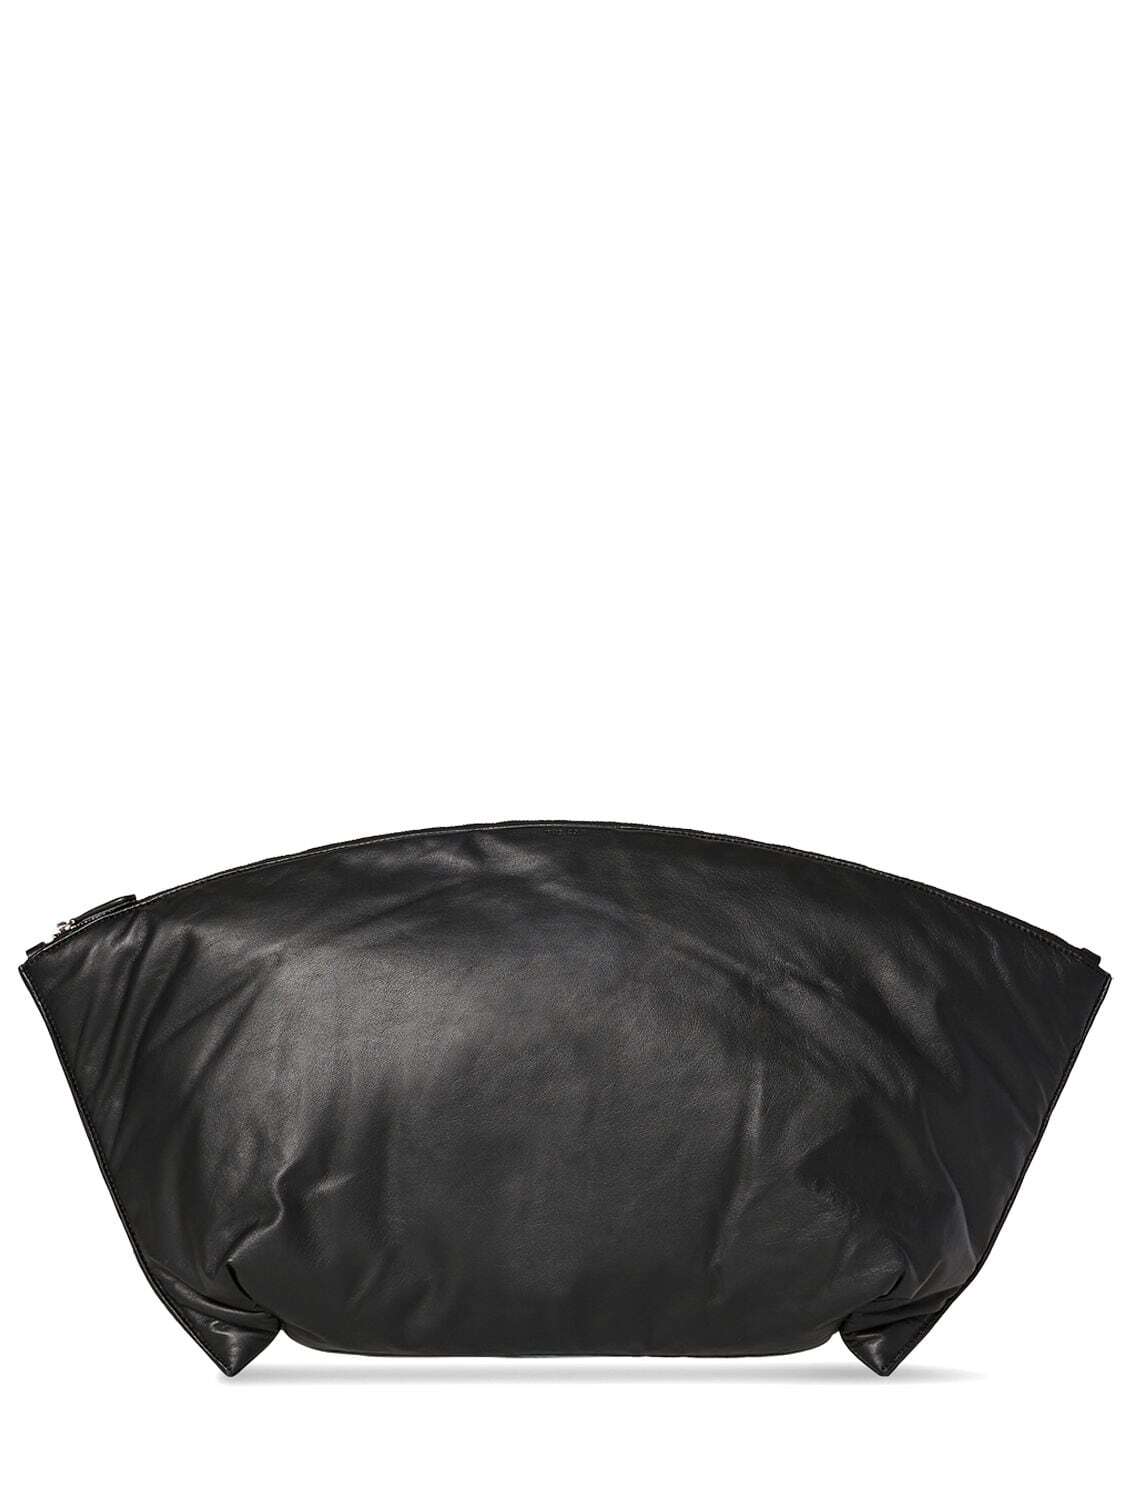 THE ROW Xl Dante Leather Pouch in black